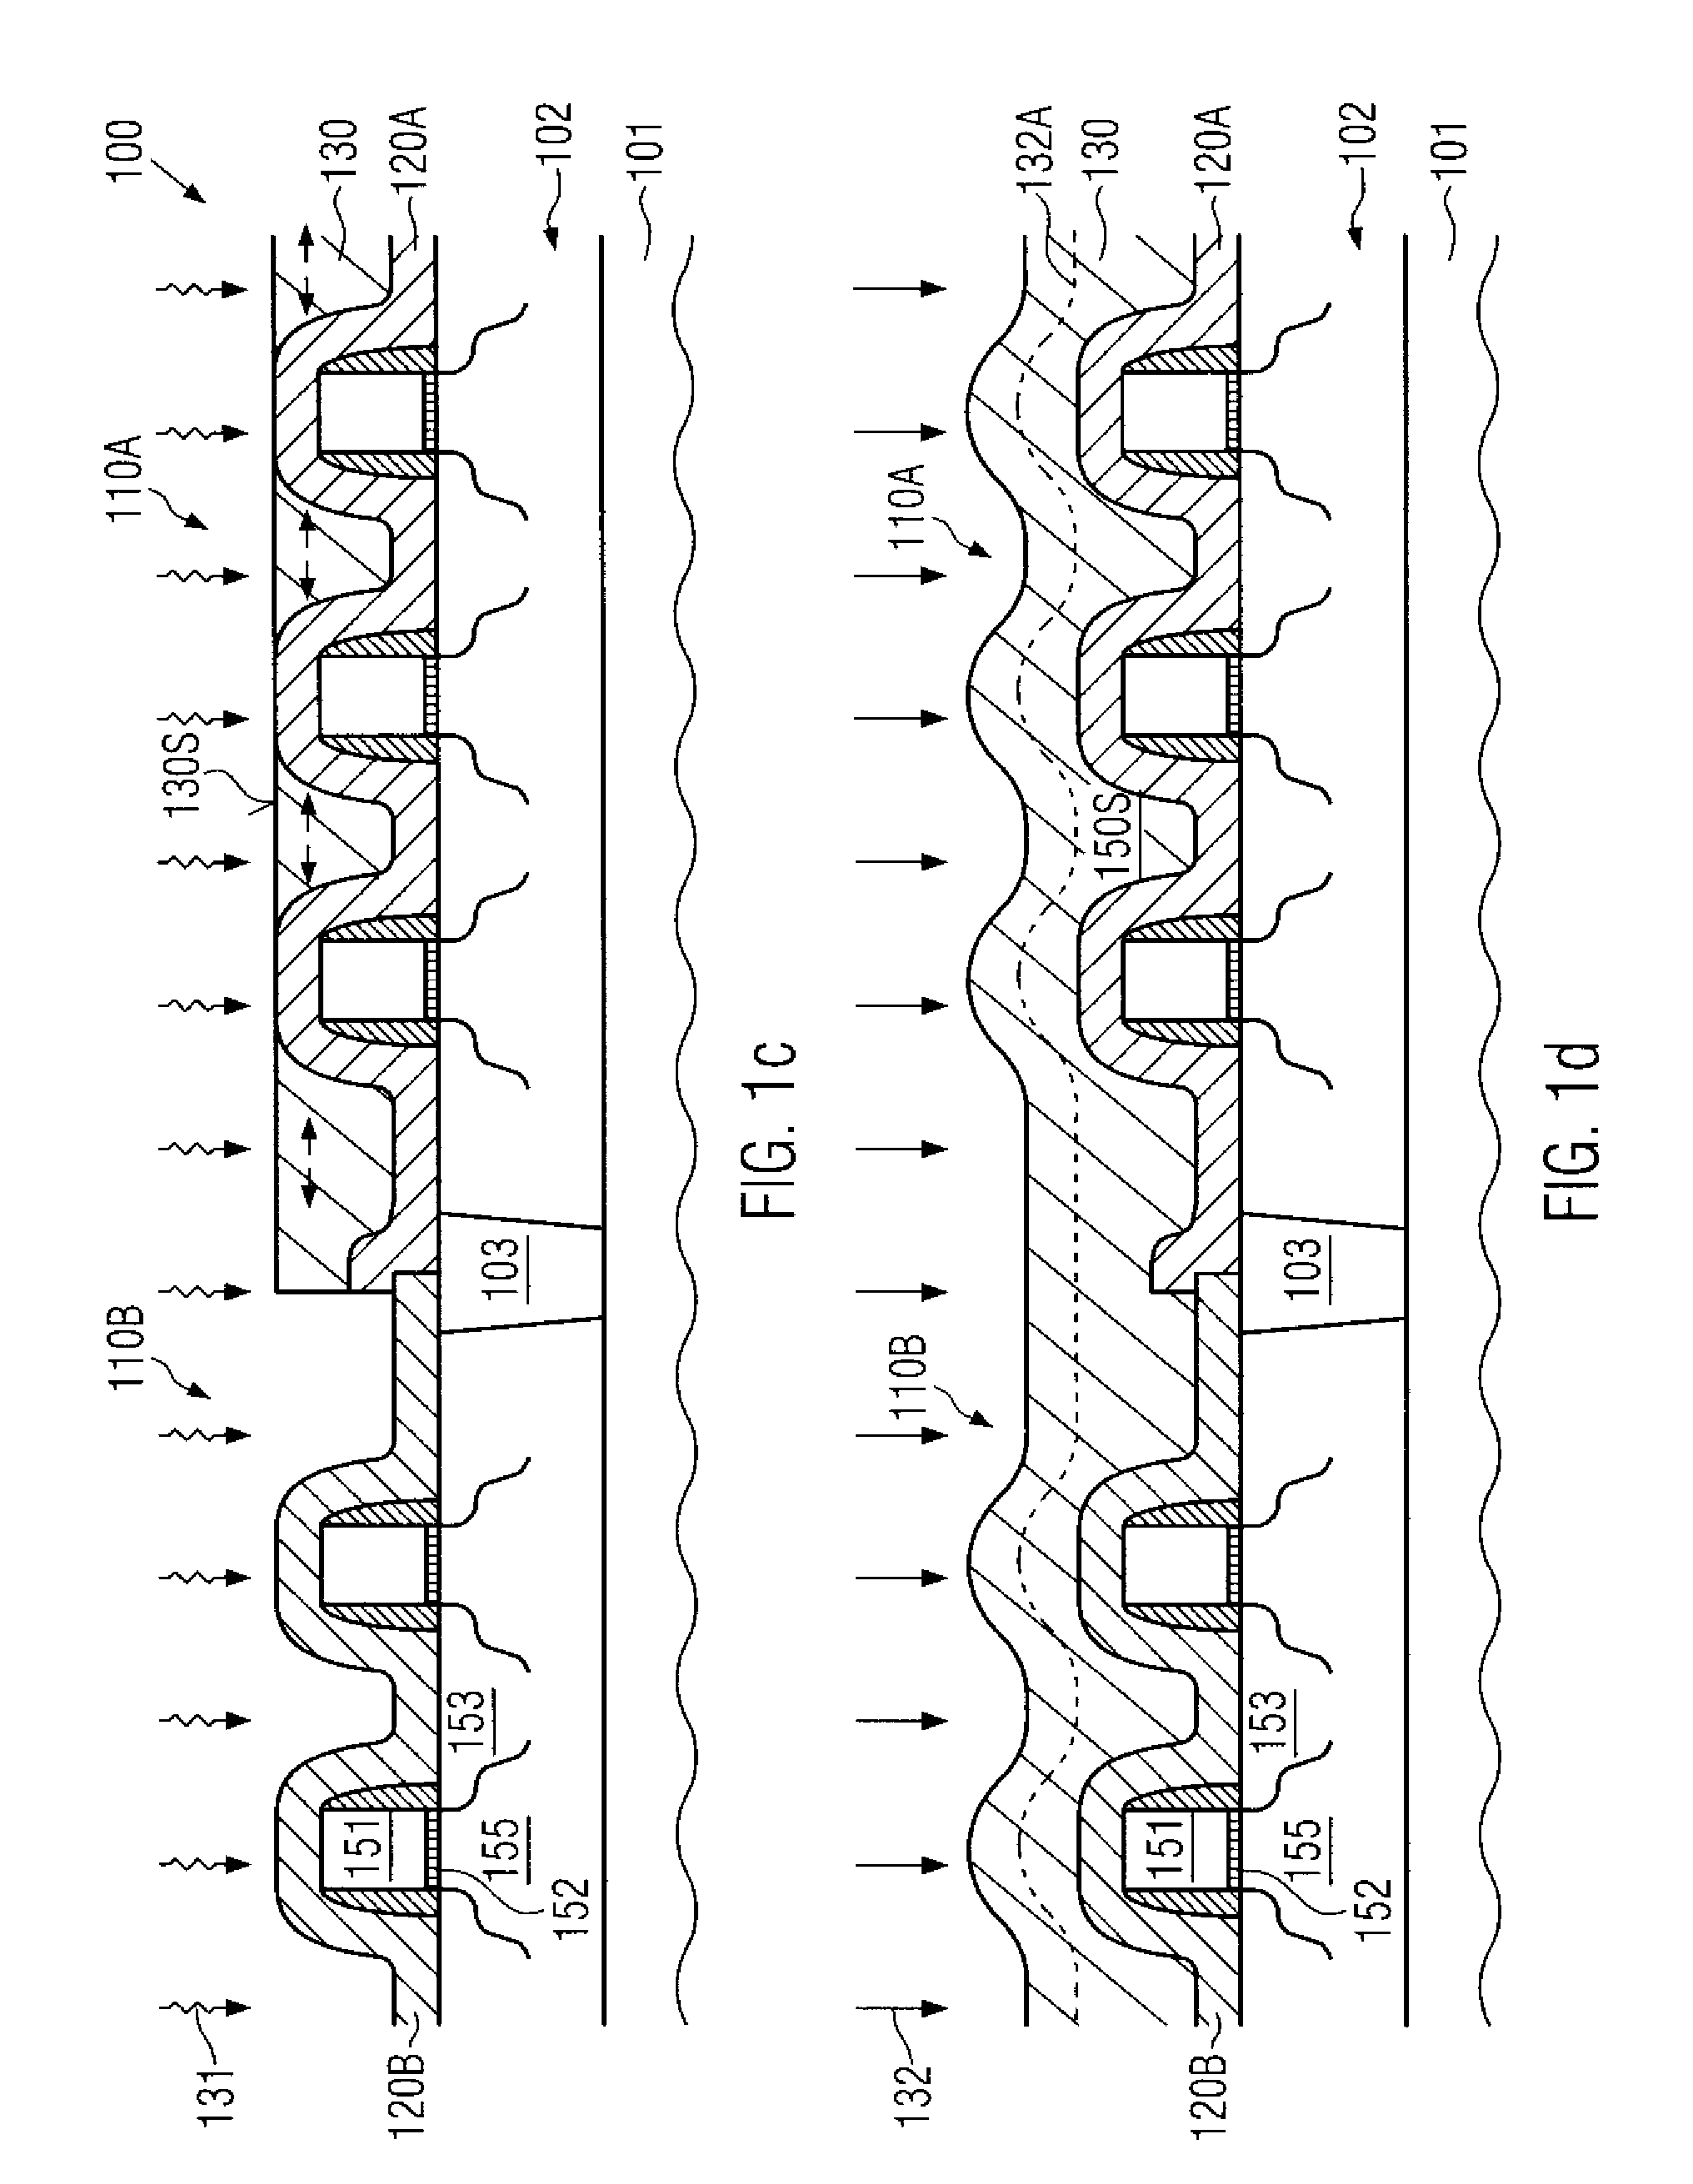 Semiconductor device including field effect transistors laterally enclosed by interlayer dielectric material having increased intrinsic stress